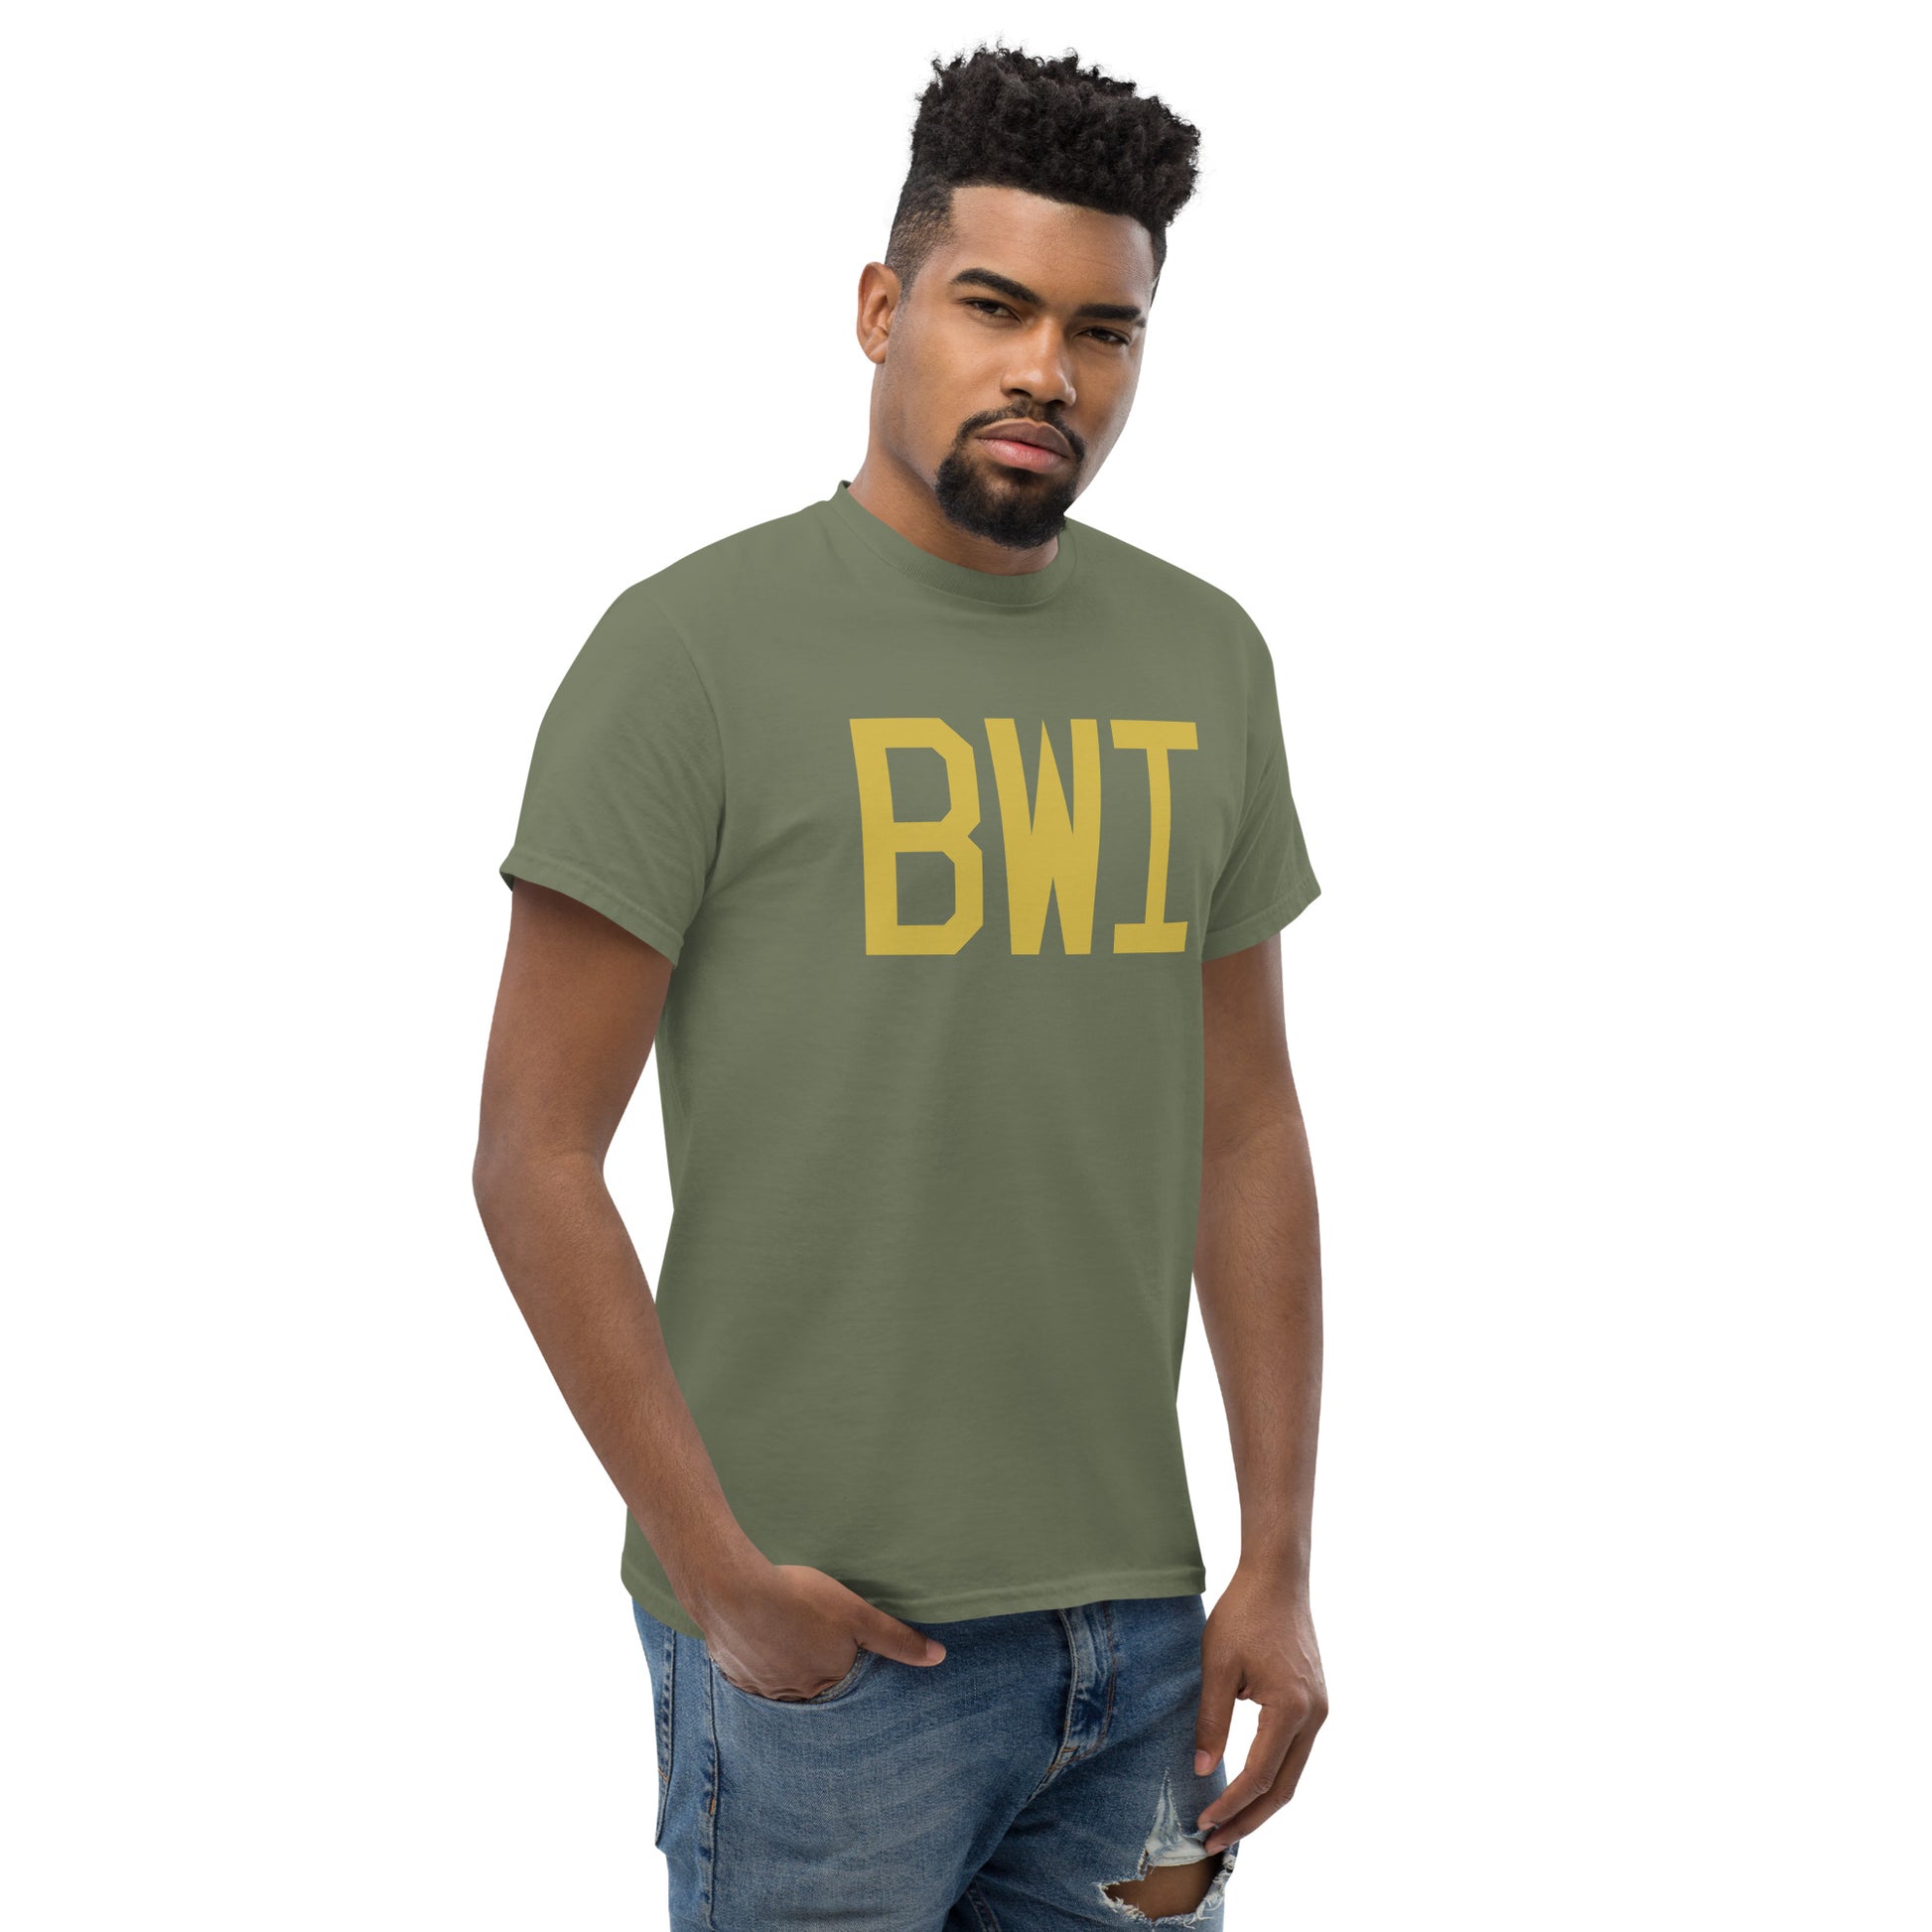 Aviation Enthusiast Men's Tee - Old Gold Graphic • BWI Baltimore • YHM Designs - Image 08